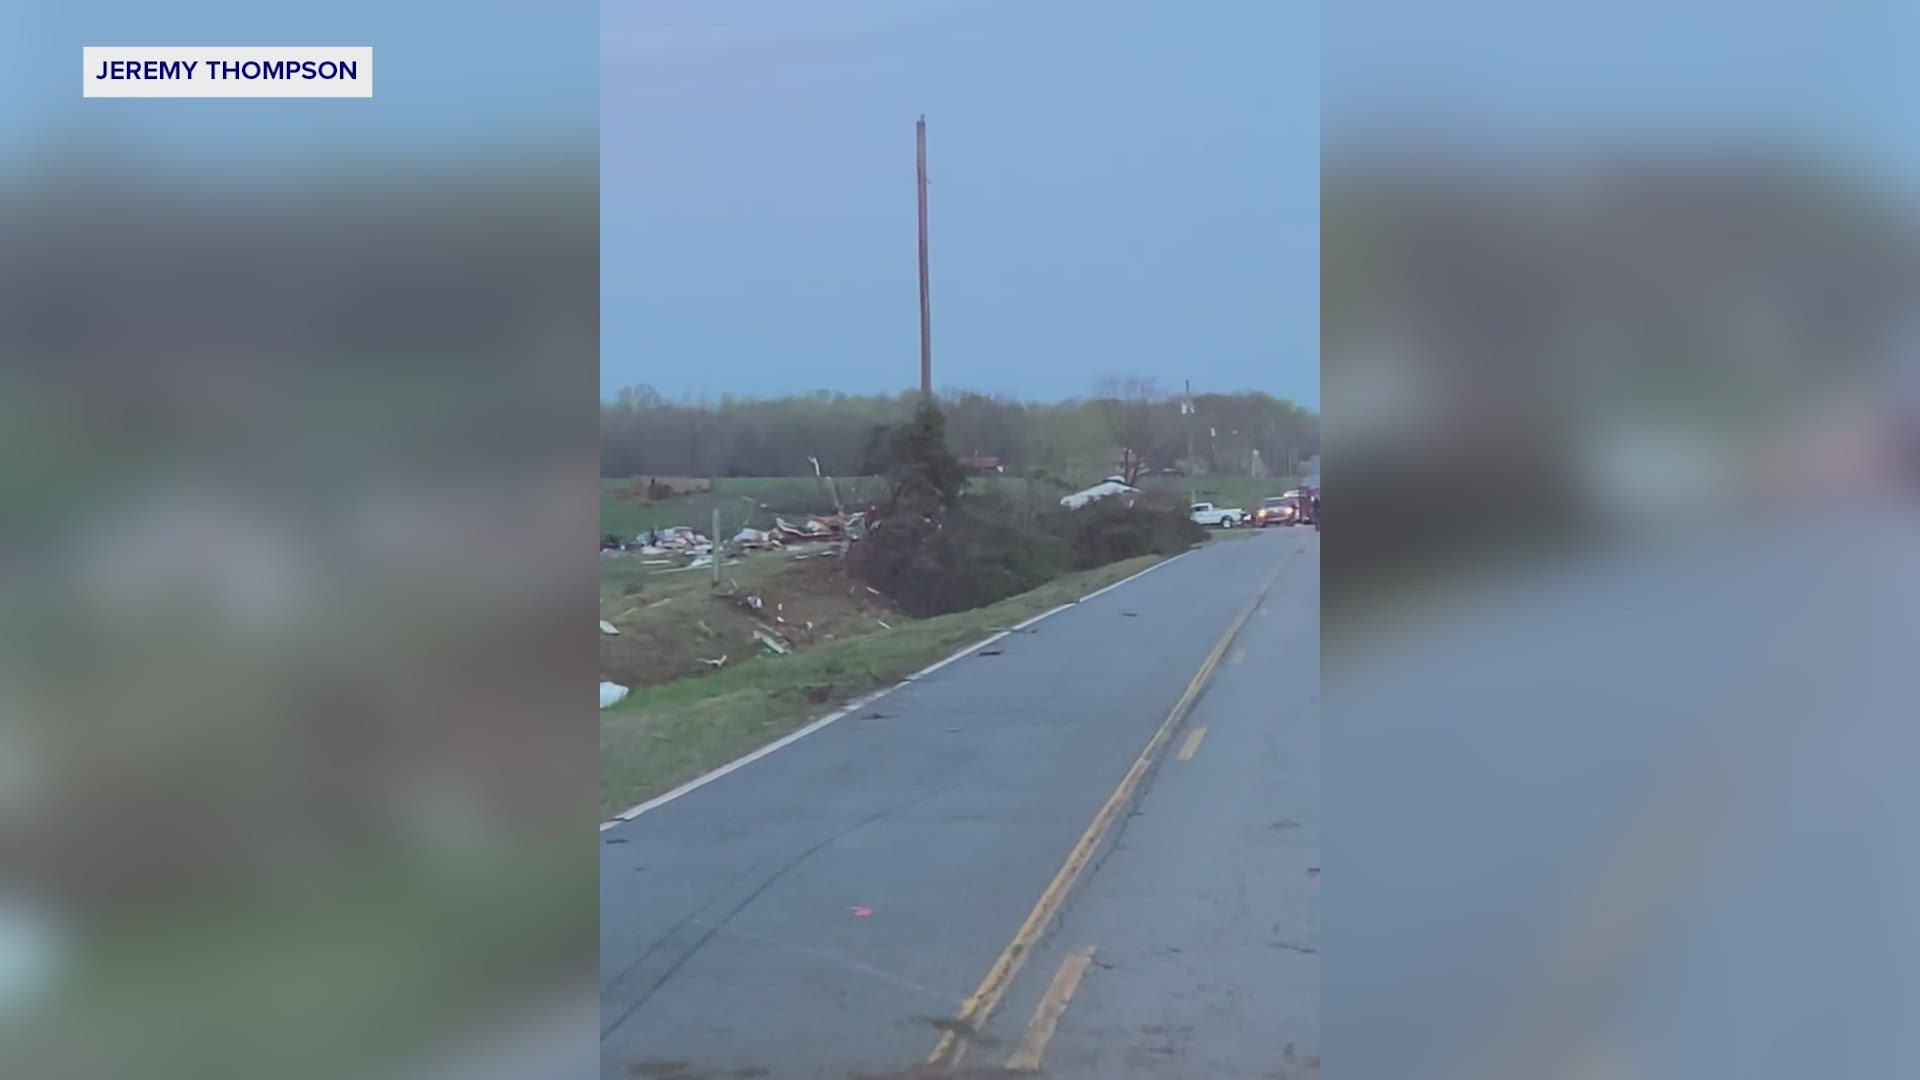 Jeremy Thompson is a volunteer with the Lincoln County (TN) Fire and Sheriff’s Departments. This was recorded after efforts to locate and assist tornado victims.